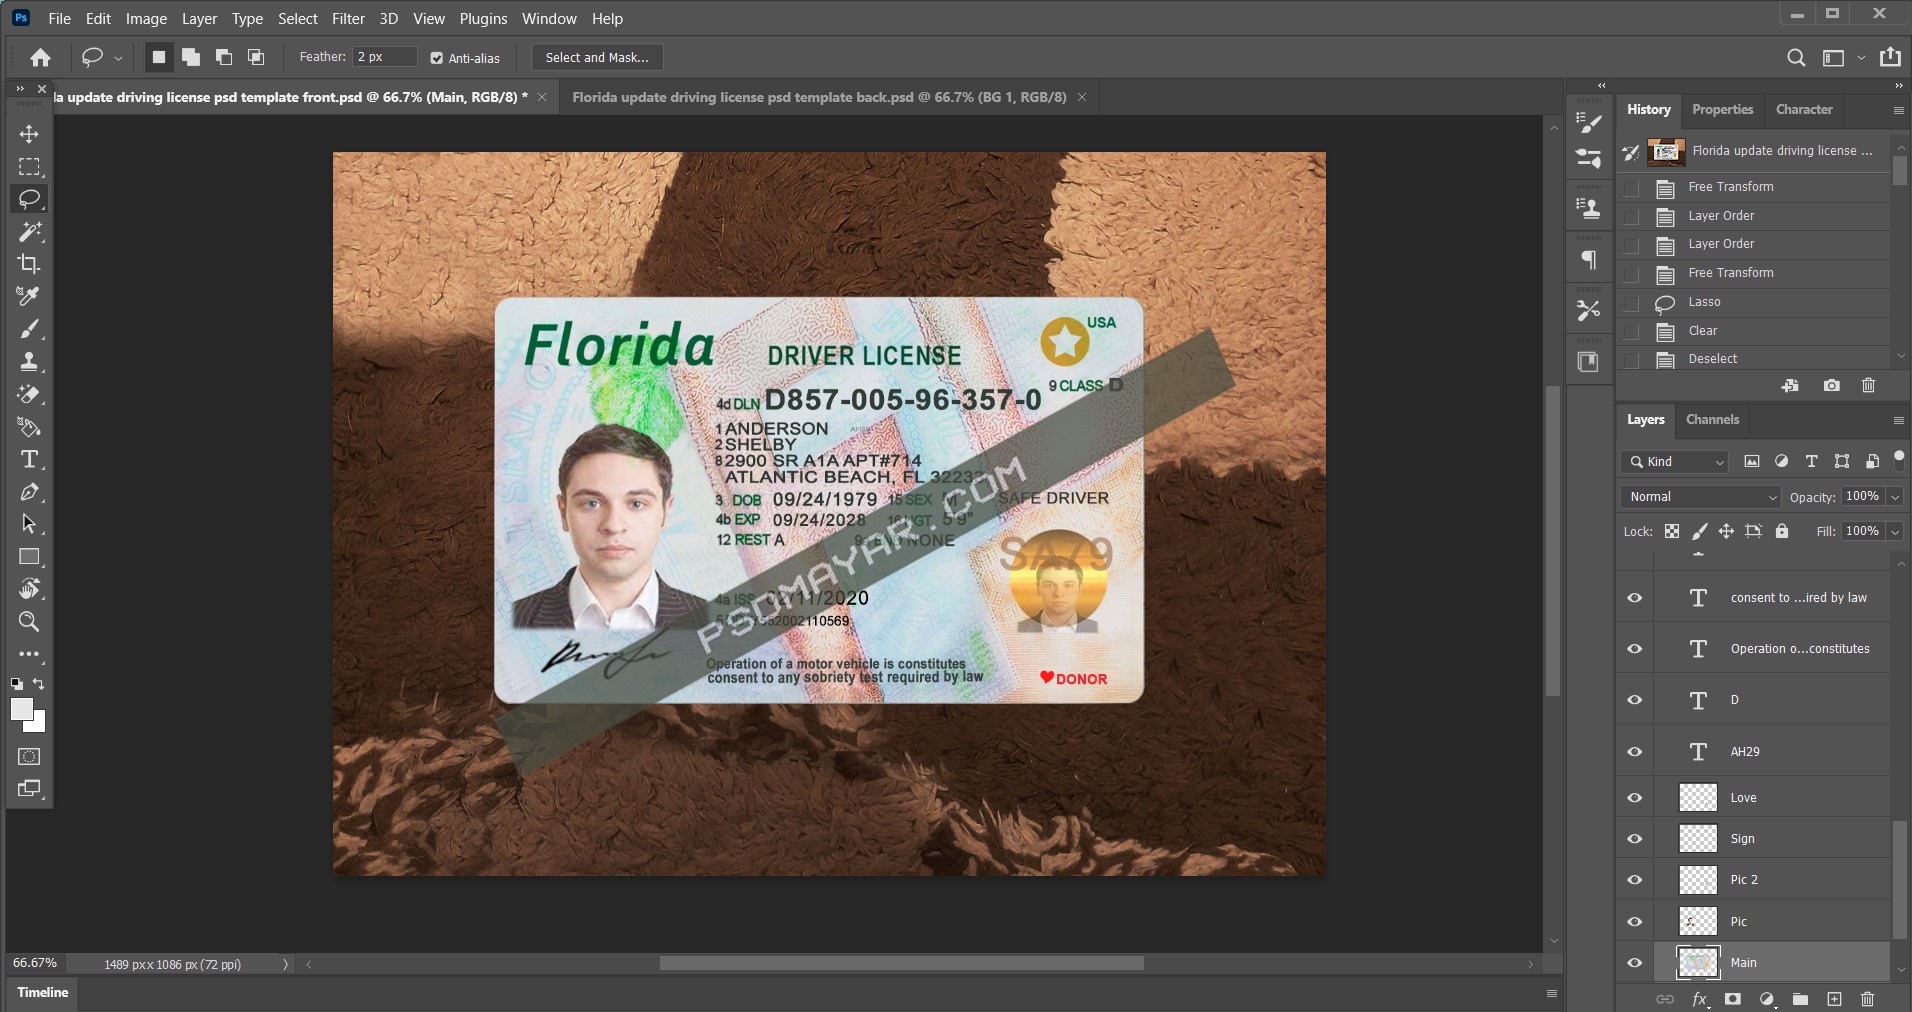 Florida update driving license psd template